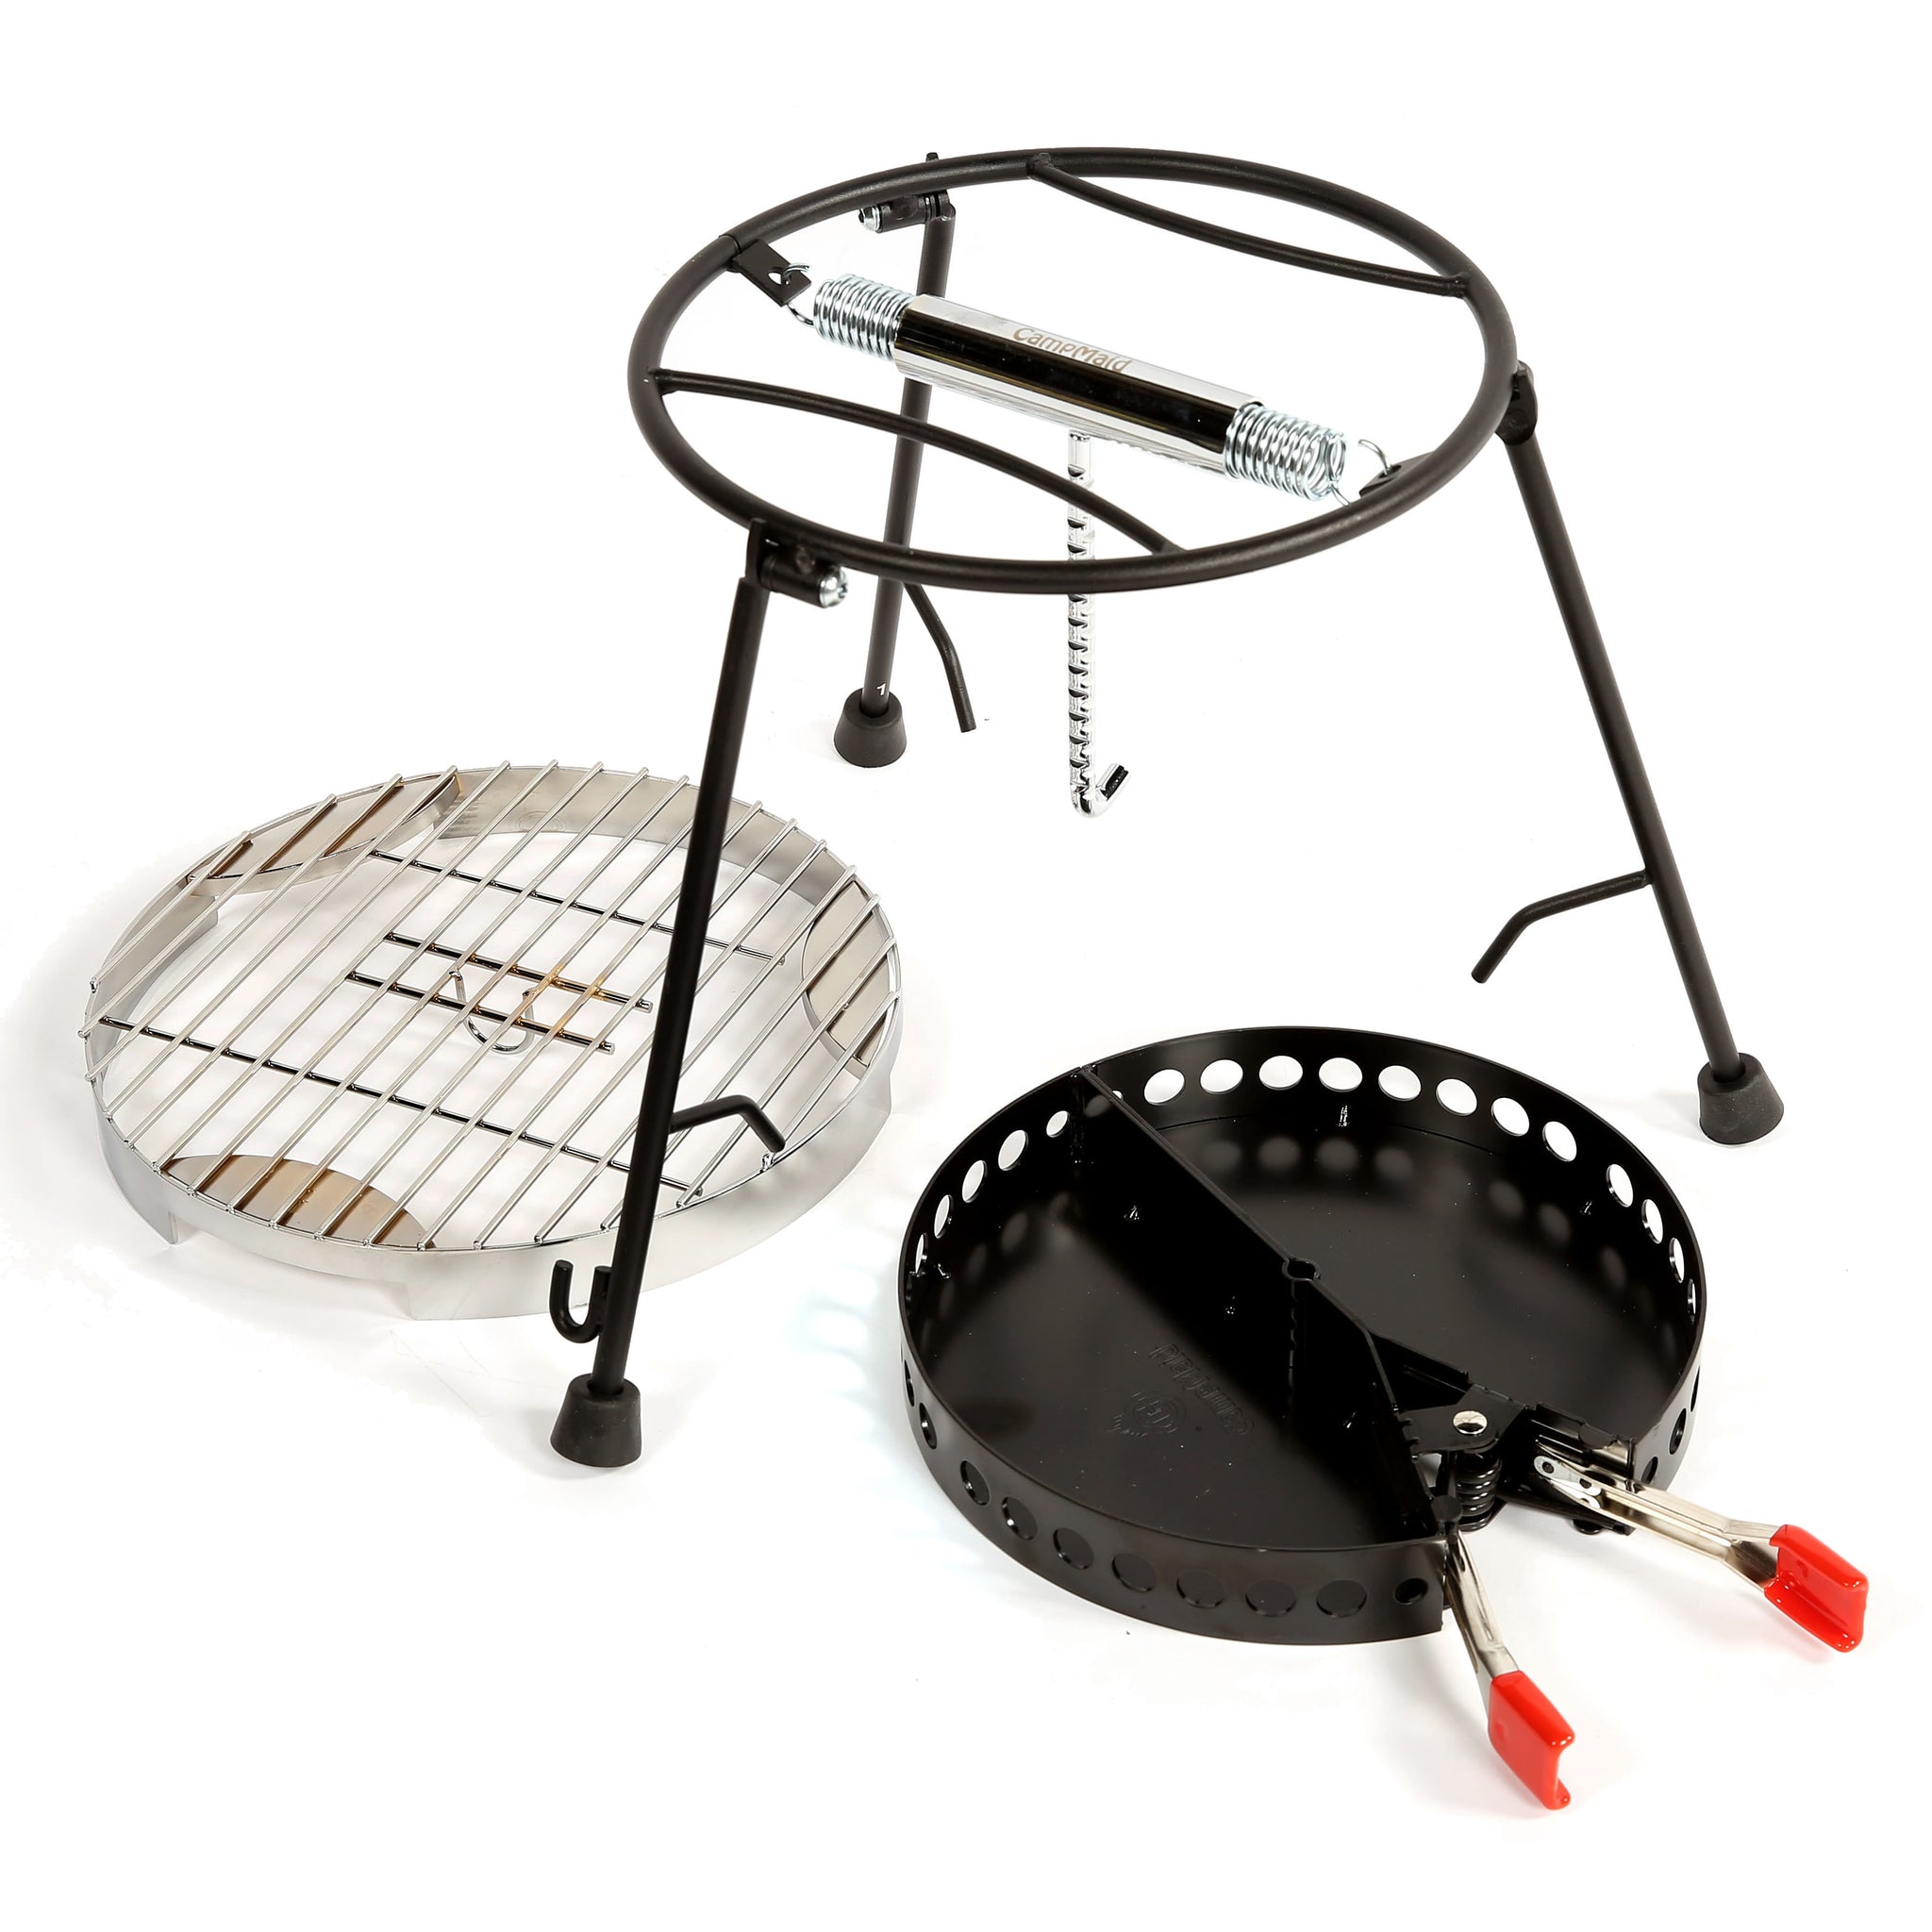 CampMaid Charcoal Holder & Lid Lifter - Dutch Oven Tools Set - Charcoal  Holder & Cast Iron Grill Accessories - Camping Grill Set - Outdoor Cooking